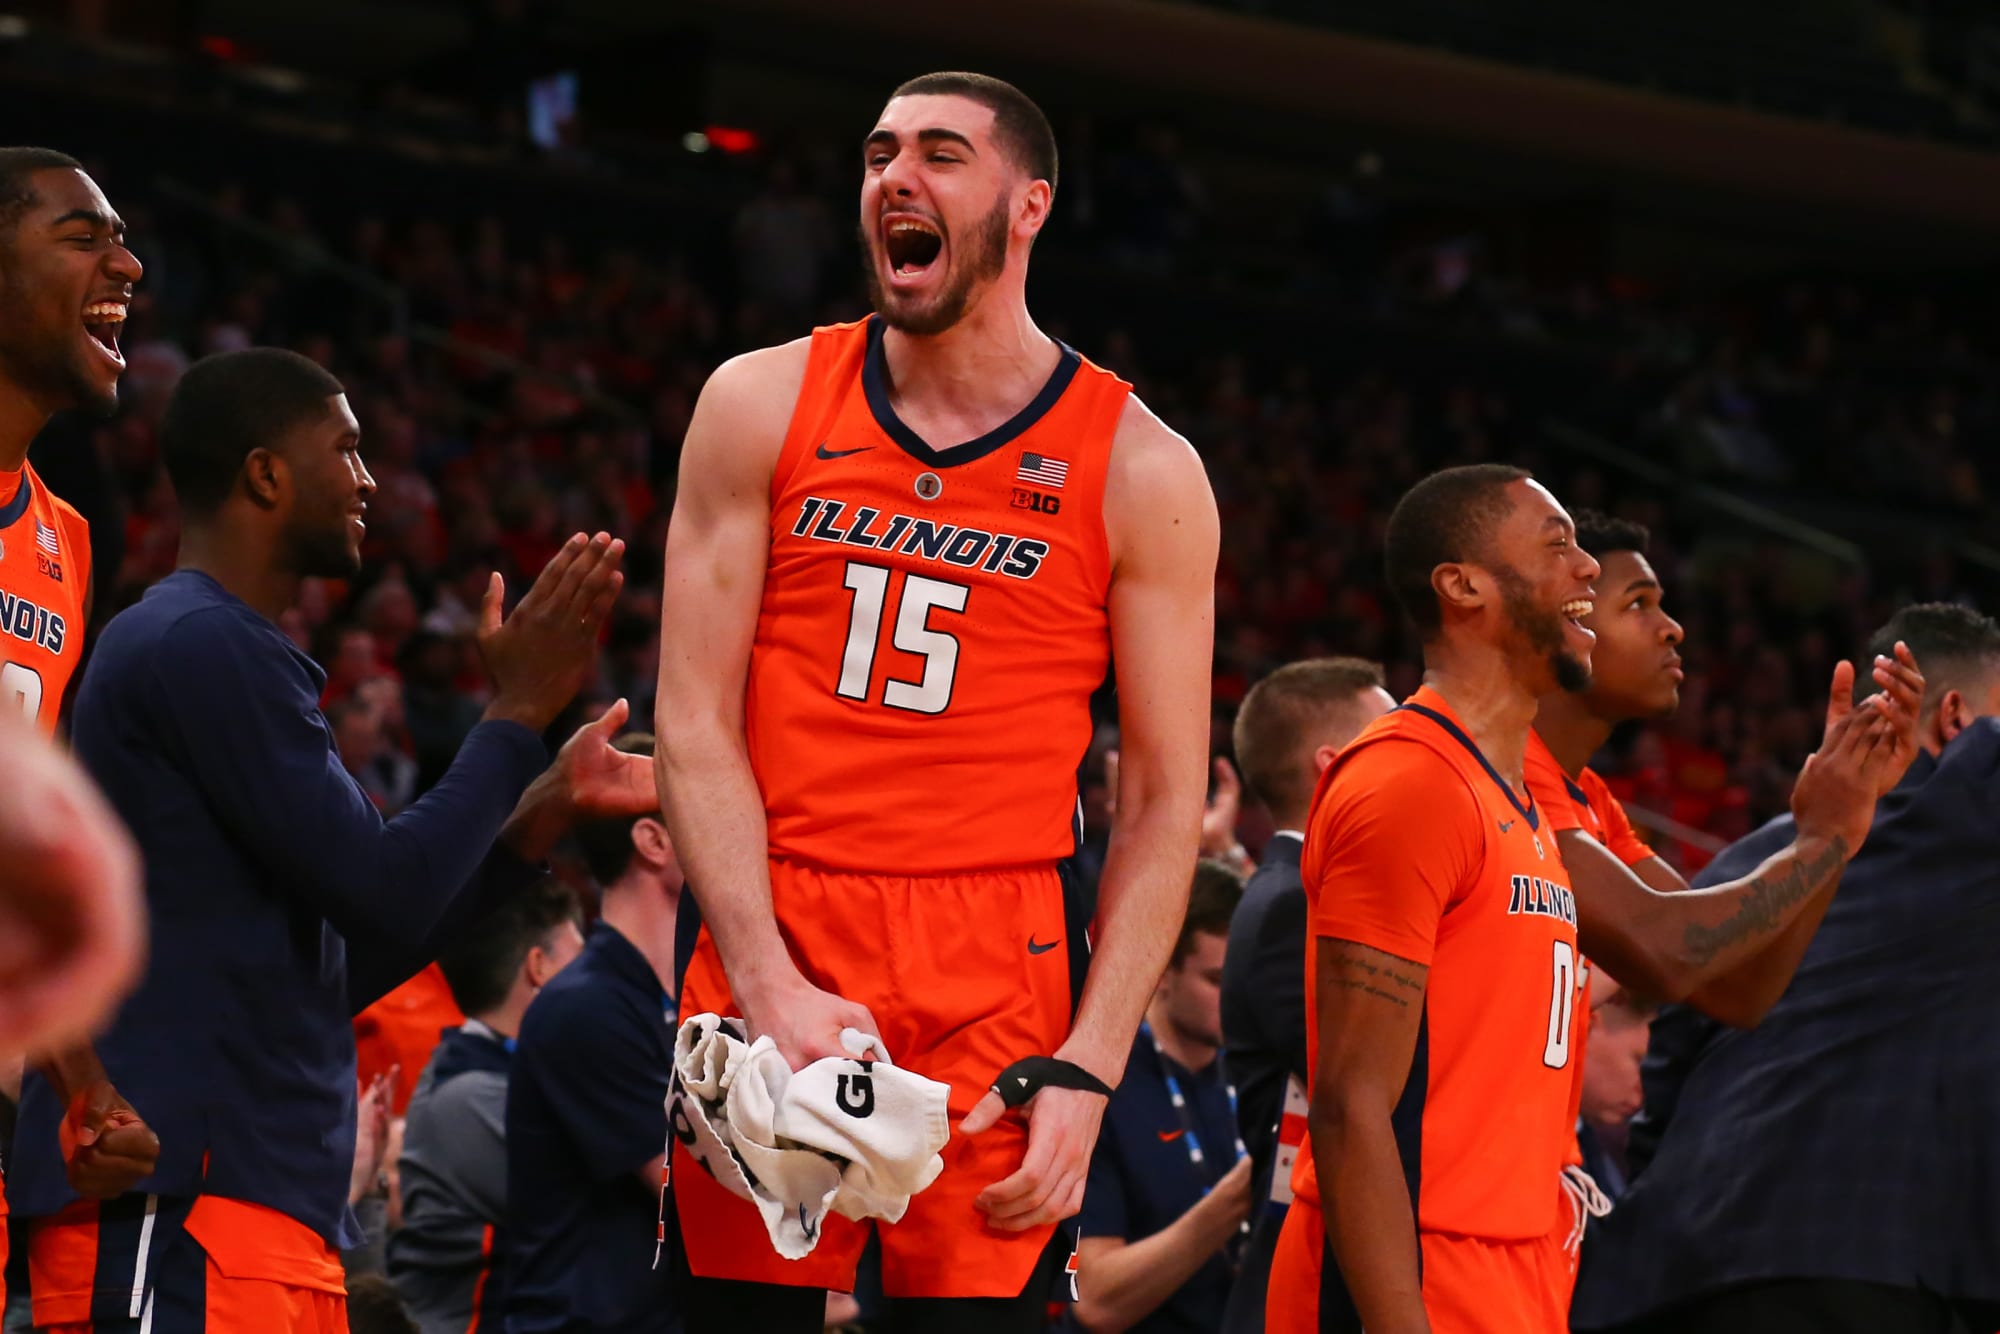 Illinois Basketball: 5 observations from the Illini win over Maryland